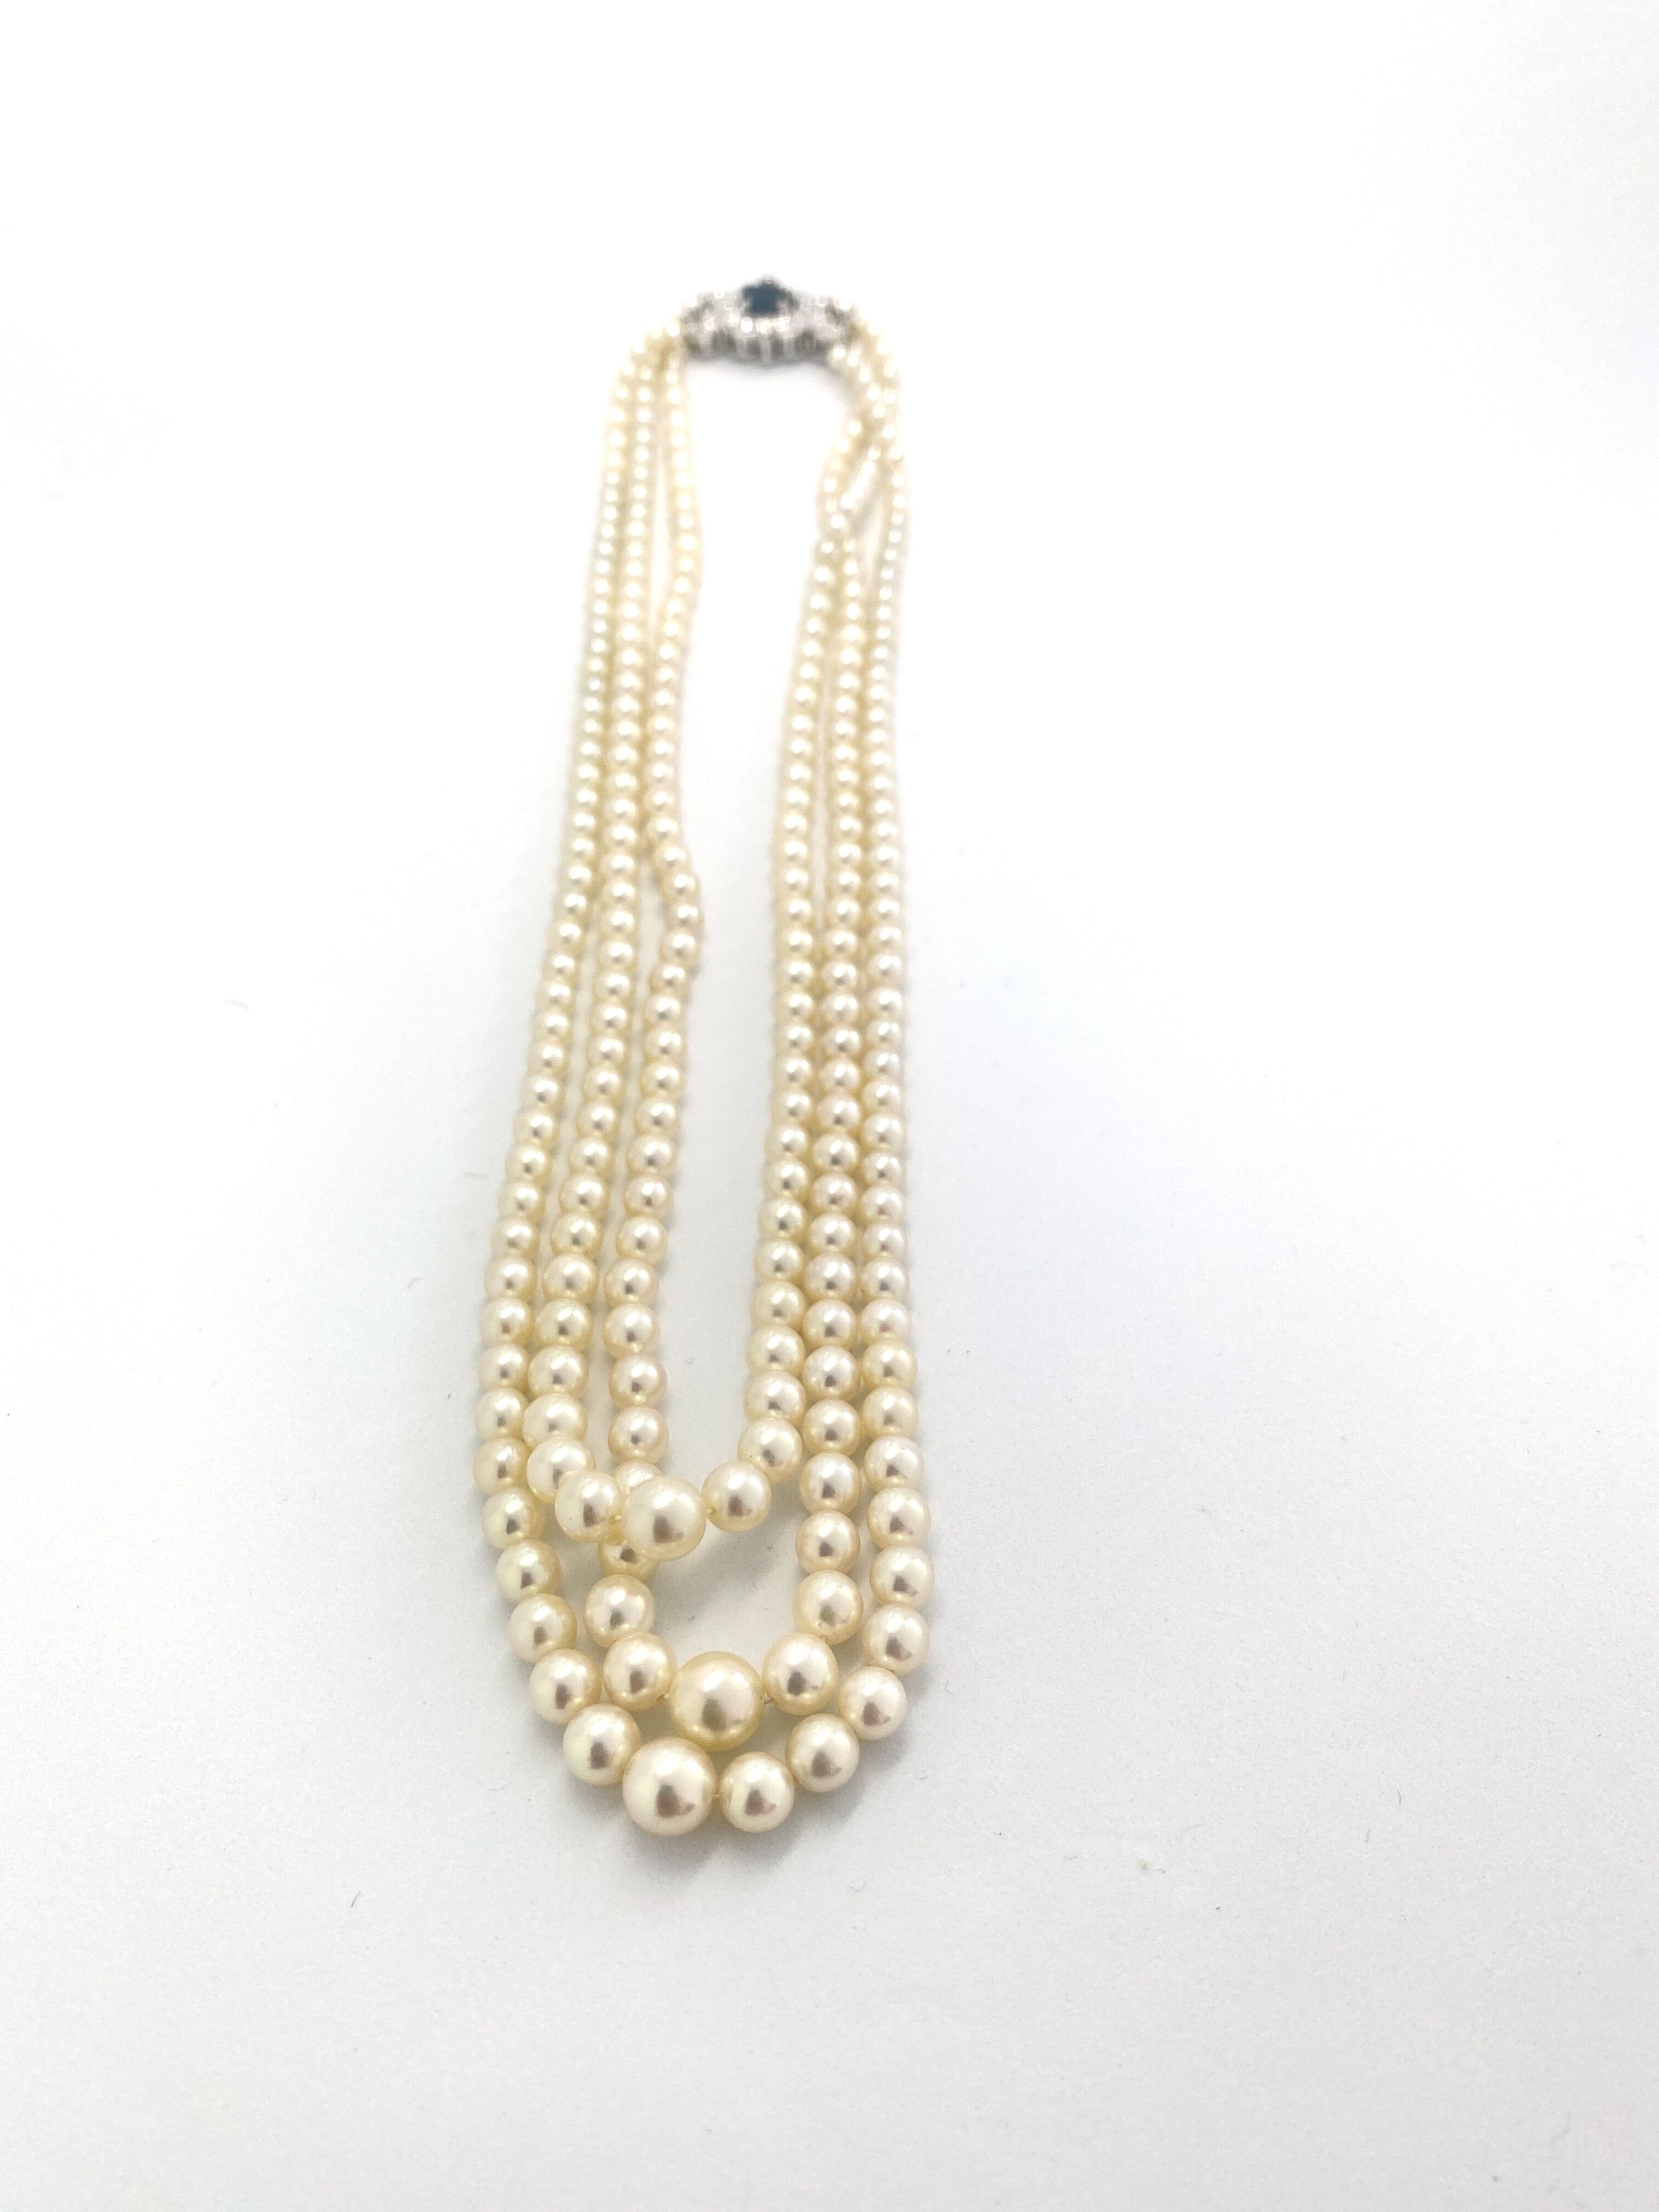 Triple Row Pearl Necklace with Sapphire and Diamond Clasp, three graduating rows of high quality - Image 2 of 4